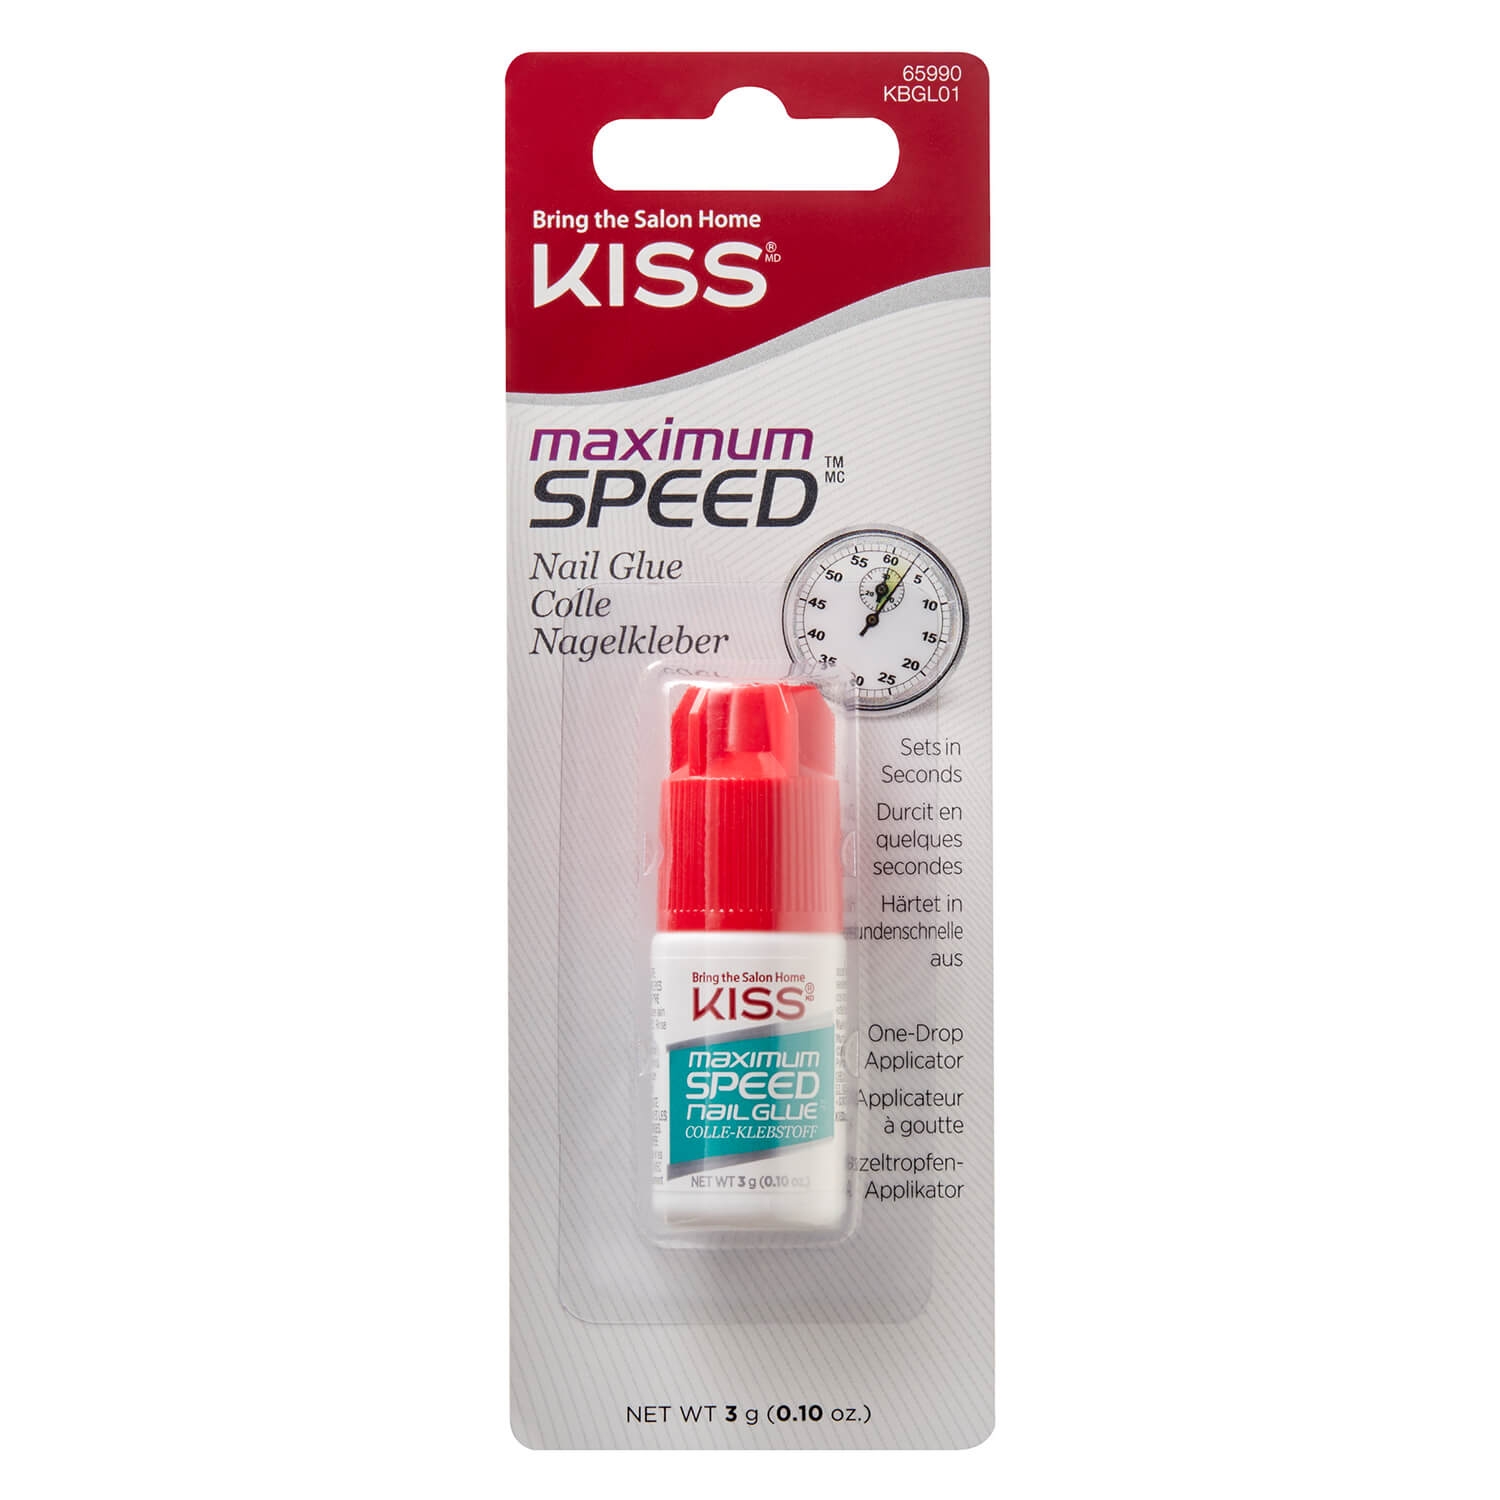 Product image from KISS Nails - Maximum Speed Nail Glue